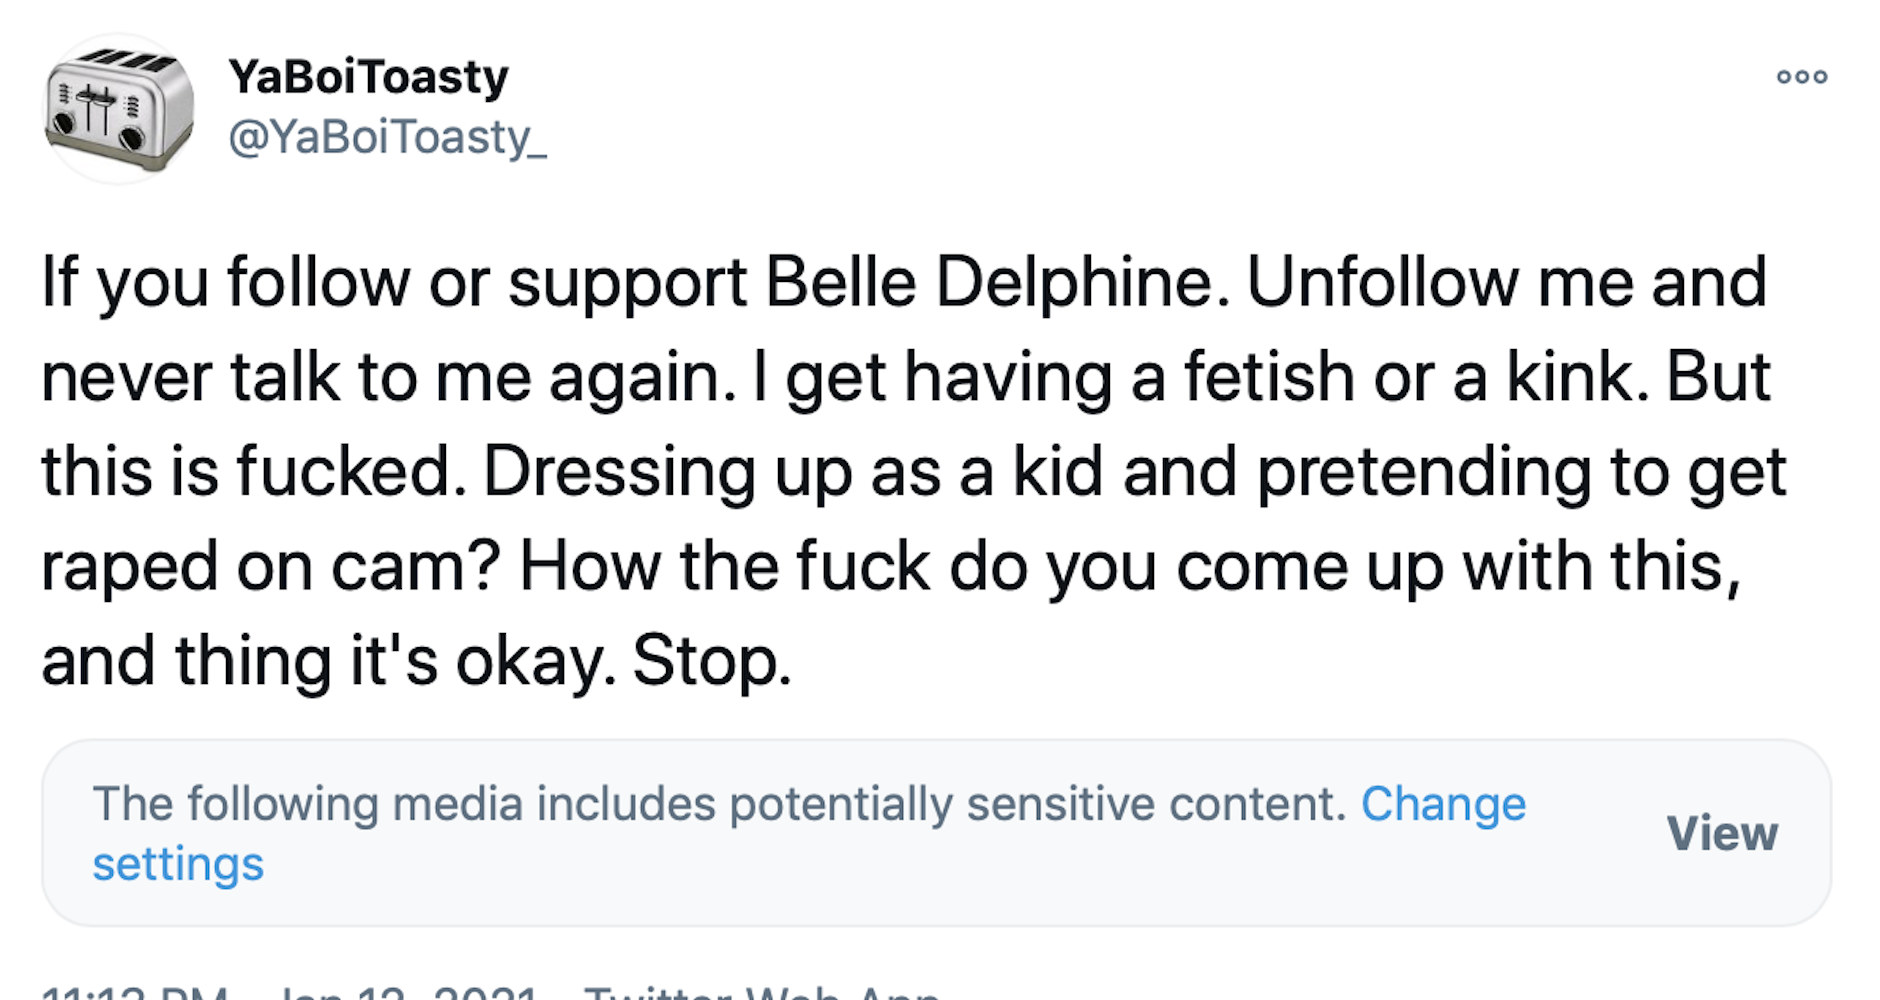 If you follow or support Belle Delphine. Unfollow me and never talk to me again. I get having a fetish or a kink. But this is fucked. Dressing up as a kid and pretending to get raped on cam? How the fuck do you come up with this, and thing it's okay. Stop.